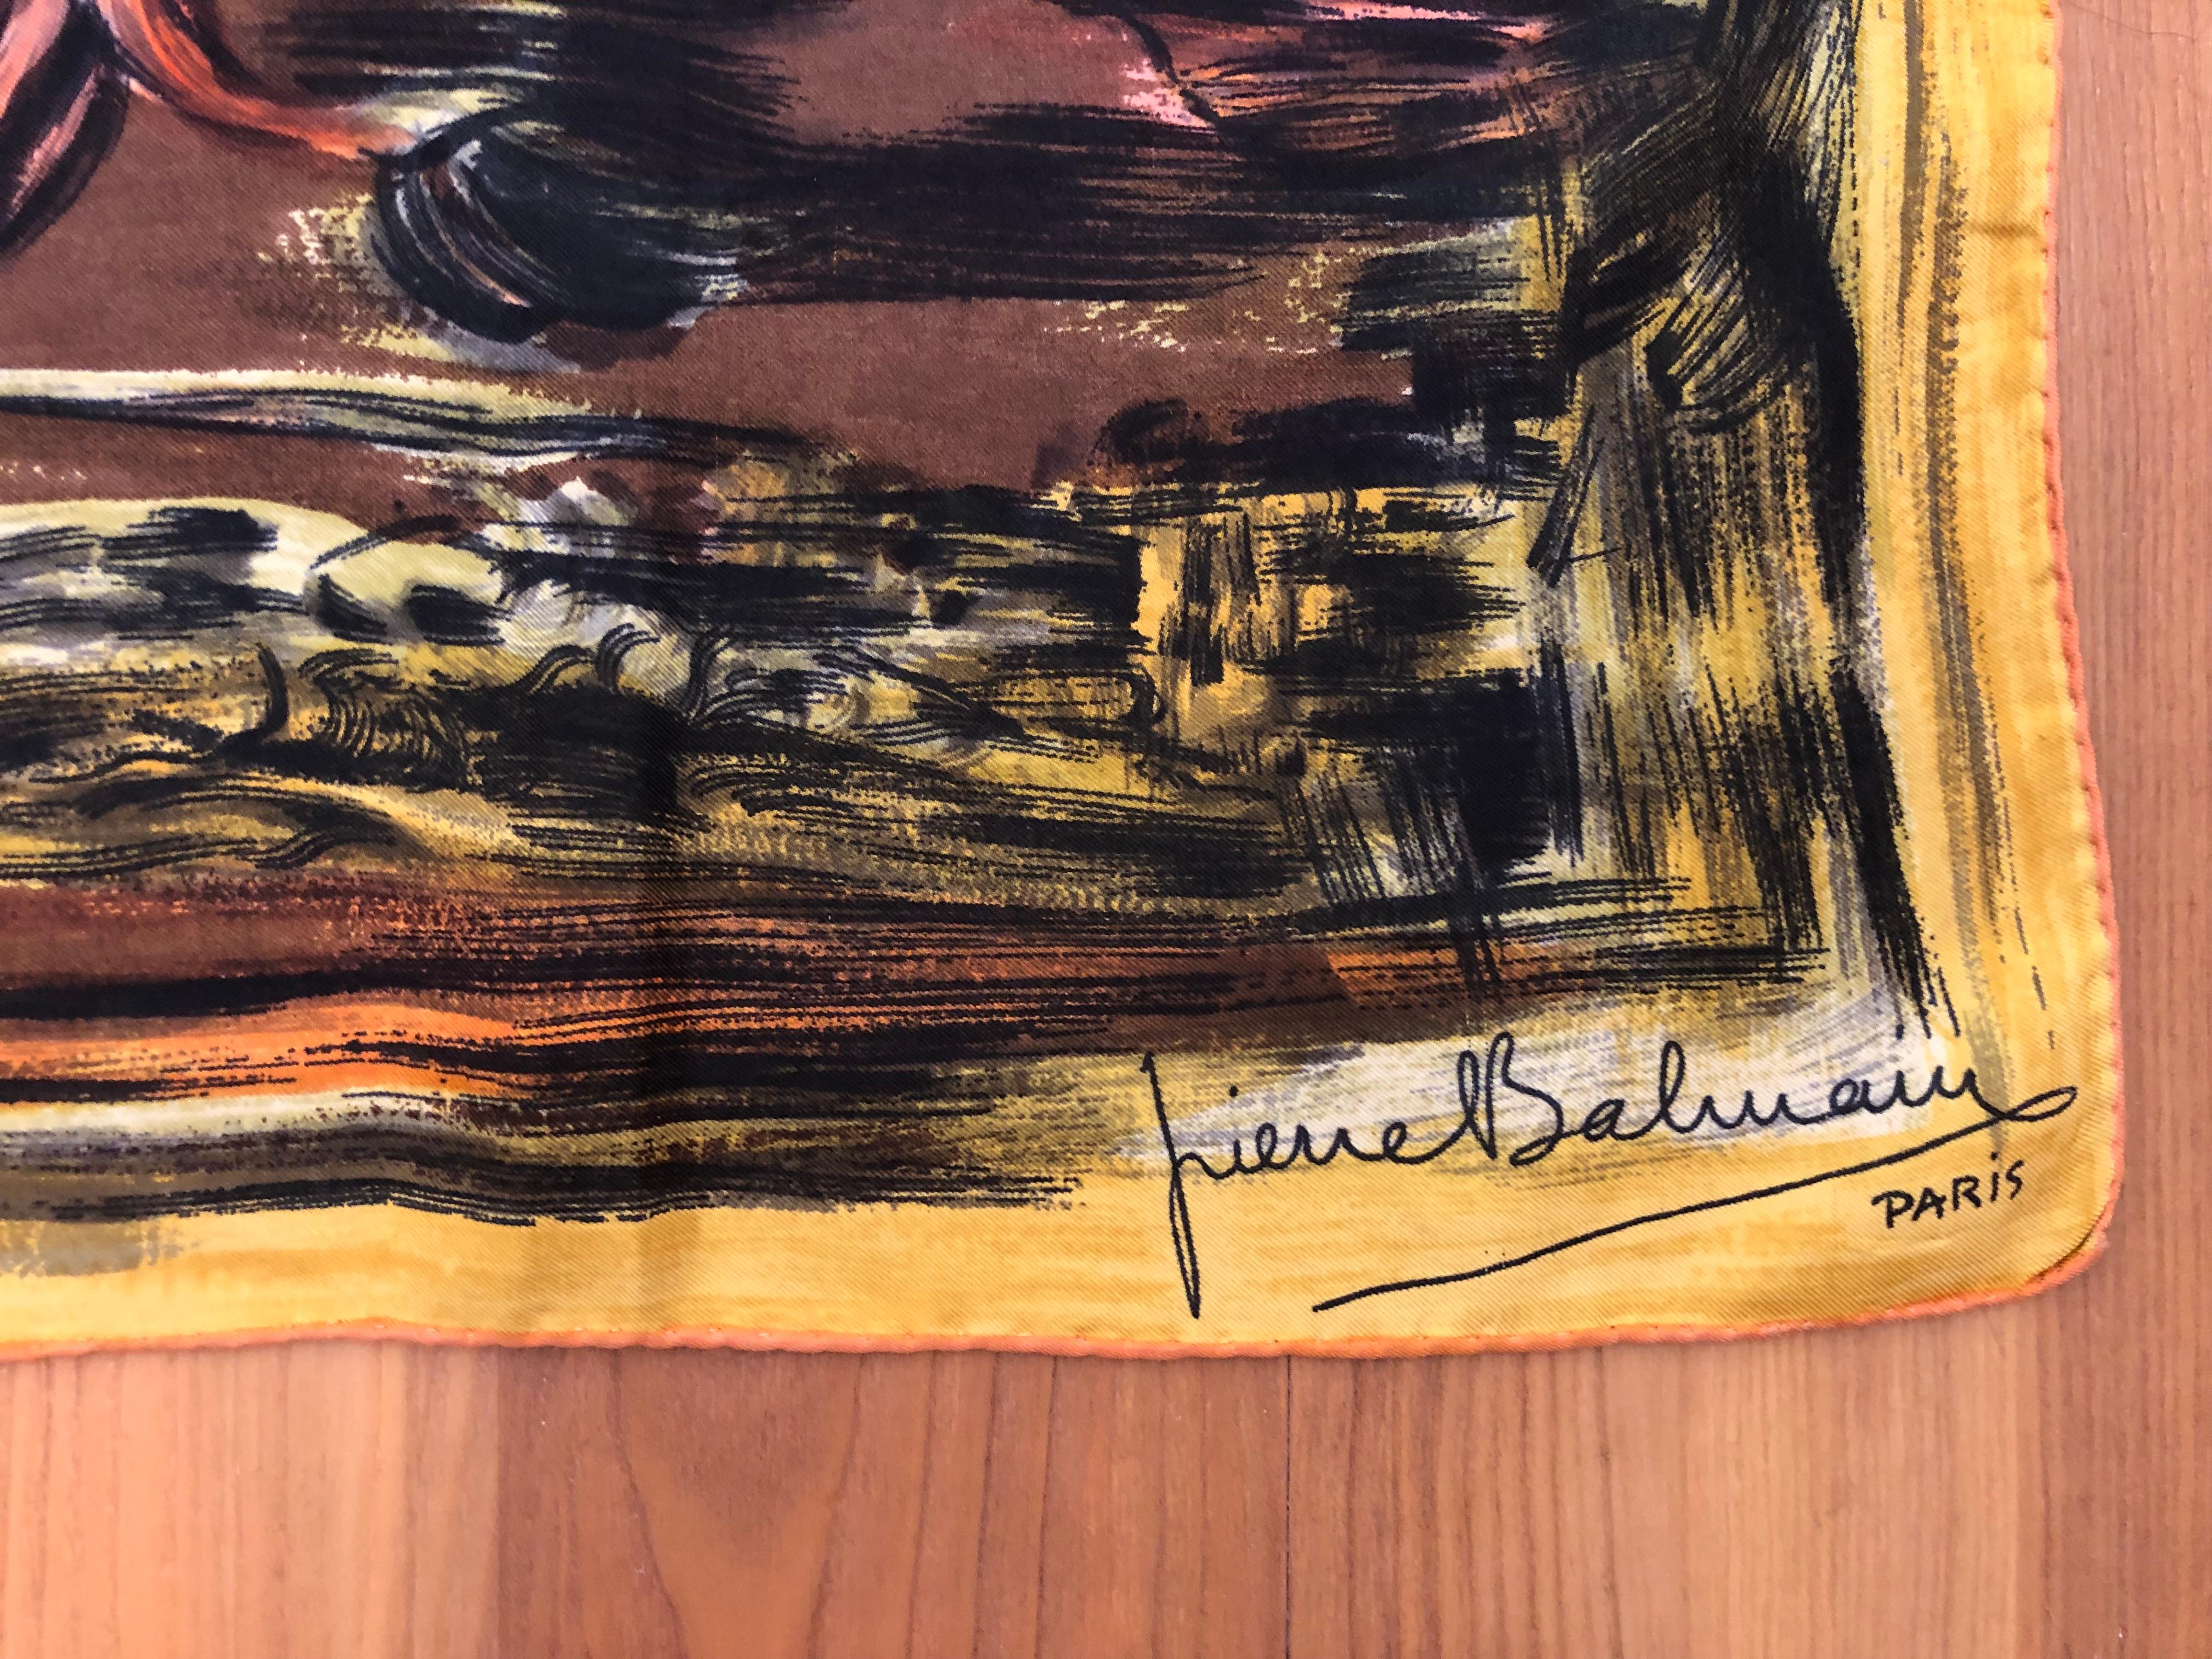 In excellent condition for a scarf this age, this scarf has a nice brown background with orange, yellow, black and salmon pink splashes. When you tire of wearing it, frame it!